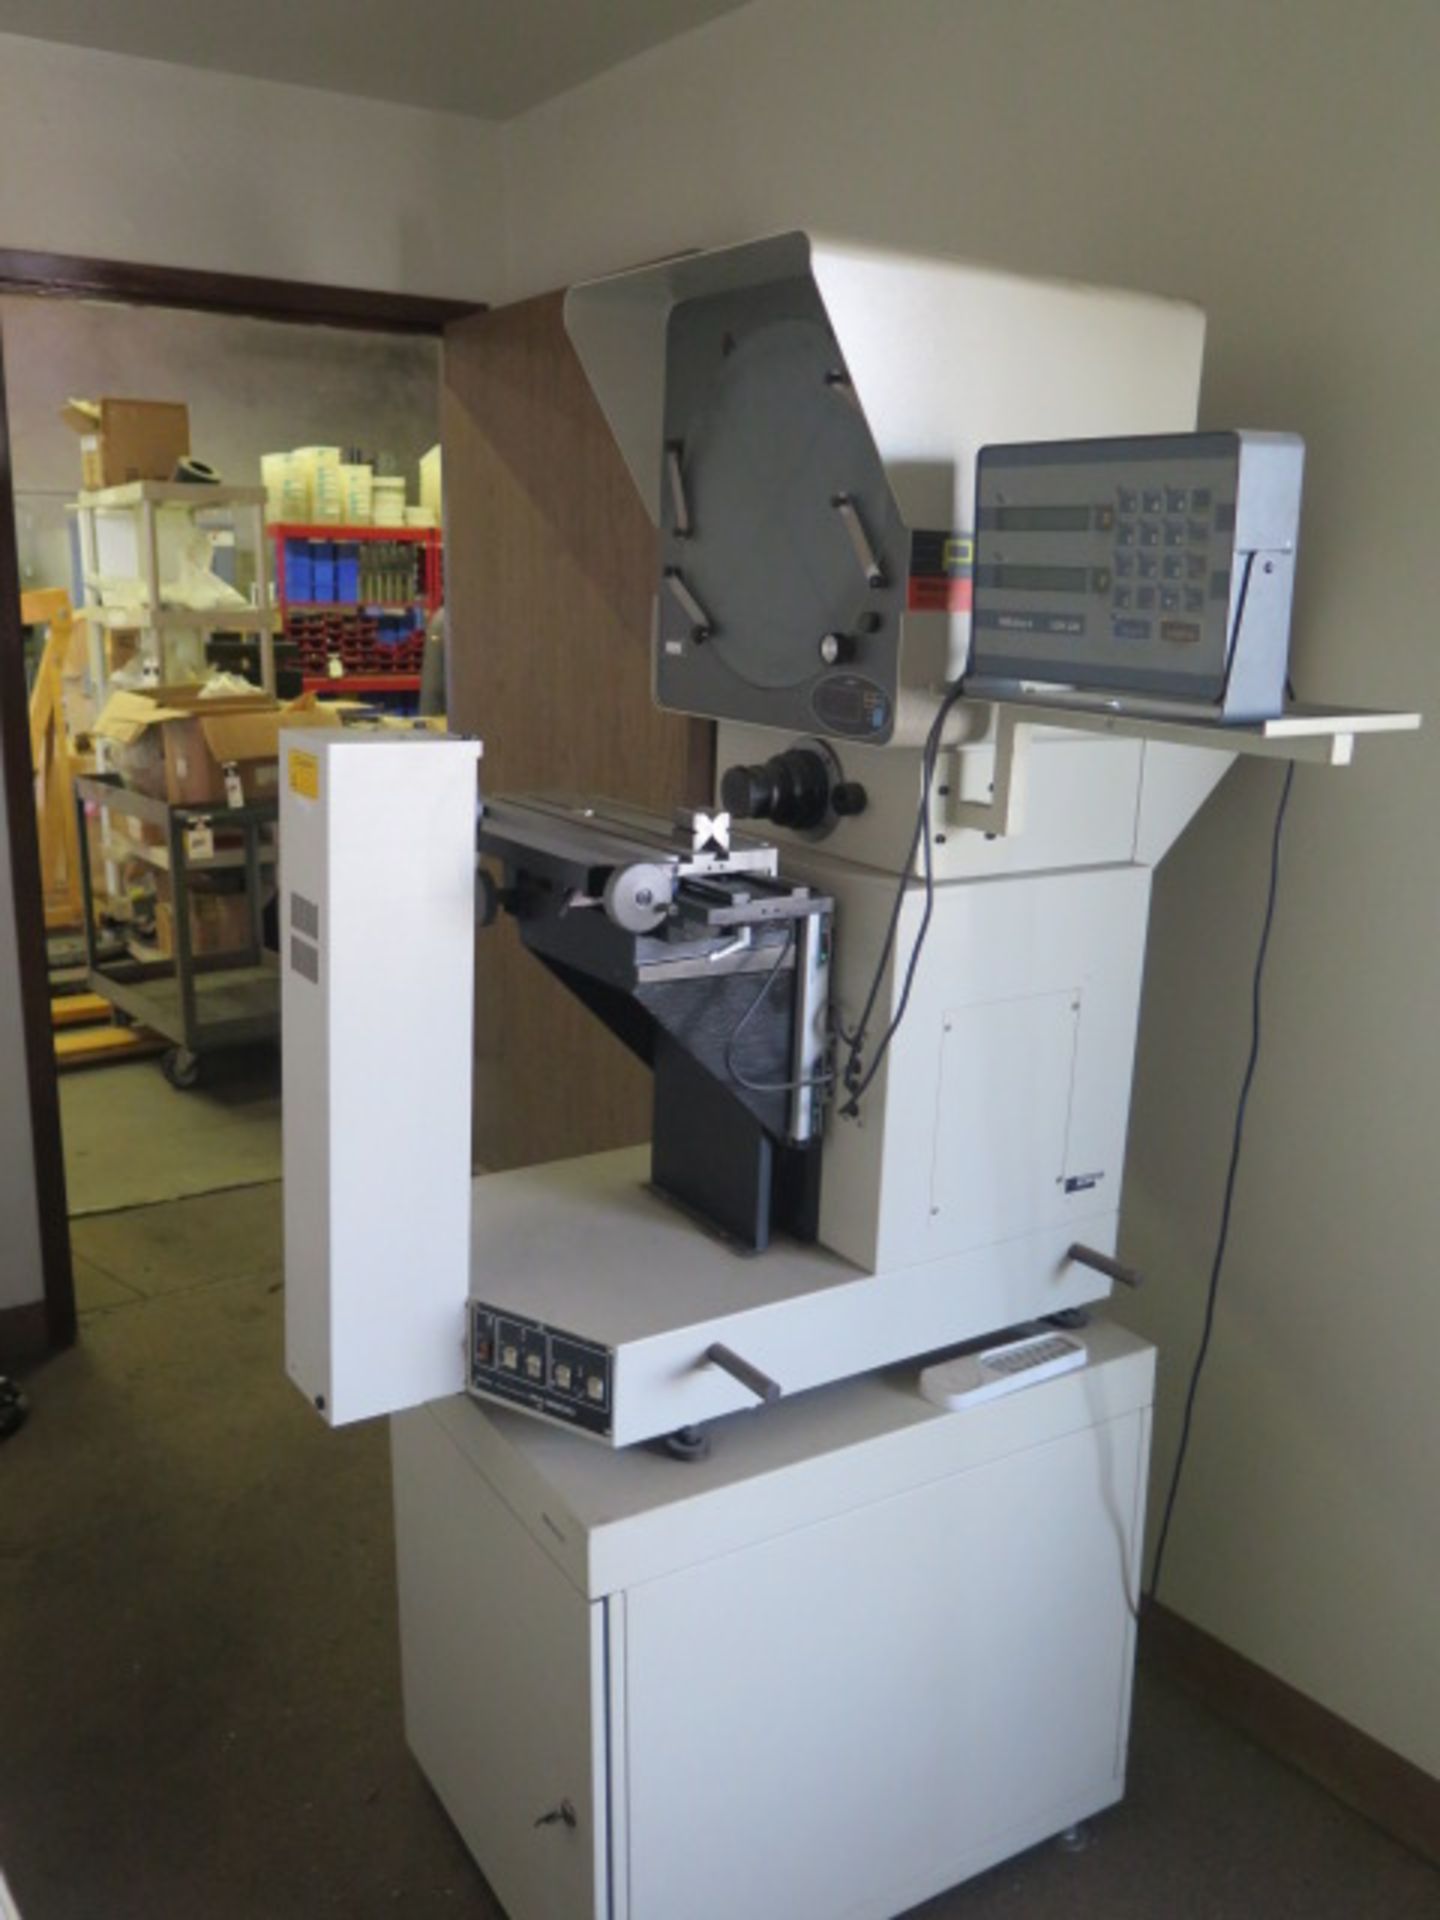 Mitutoyo PH-3500 14” Optical Comparator s/n 750161 w/ Mitutoyo UDR-220 Programmable DRO, Digital